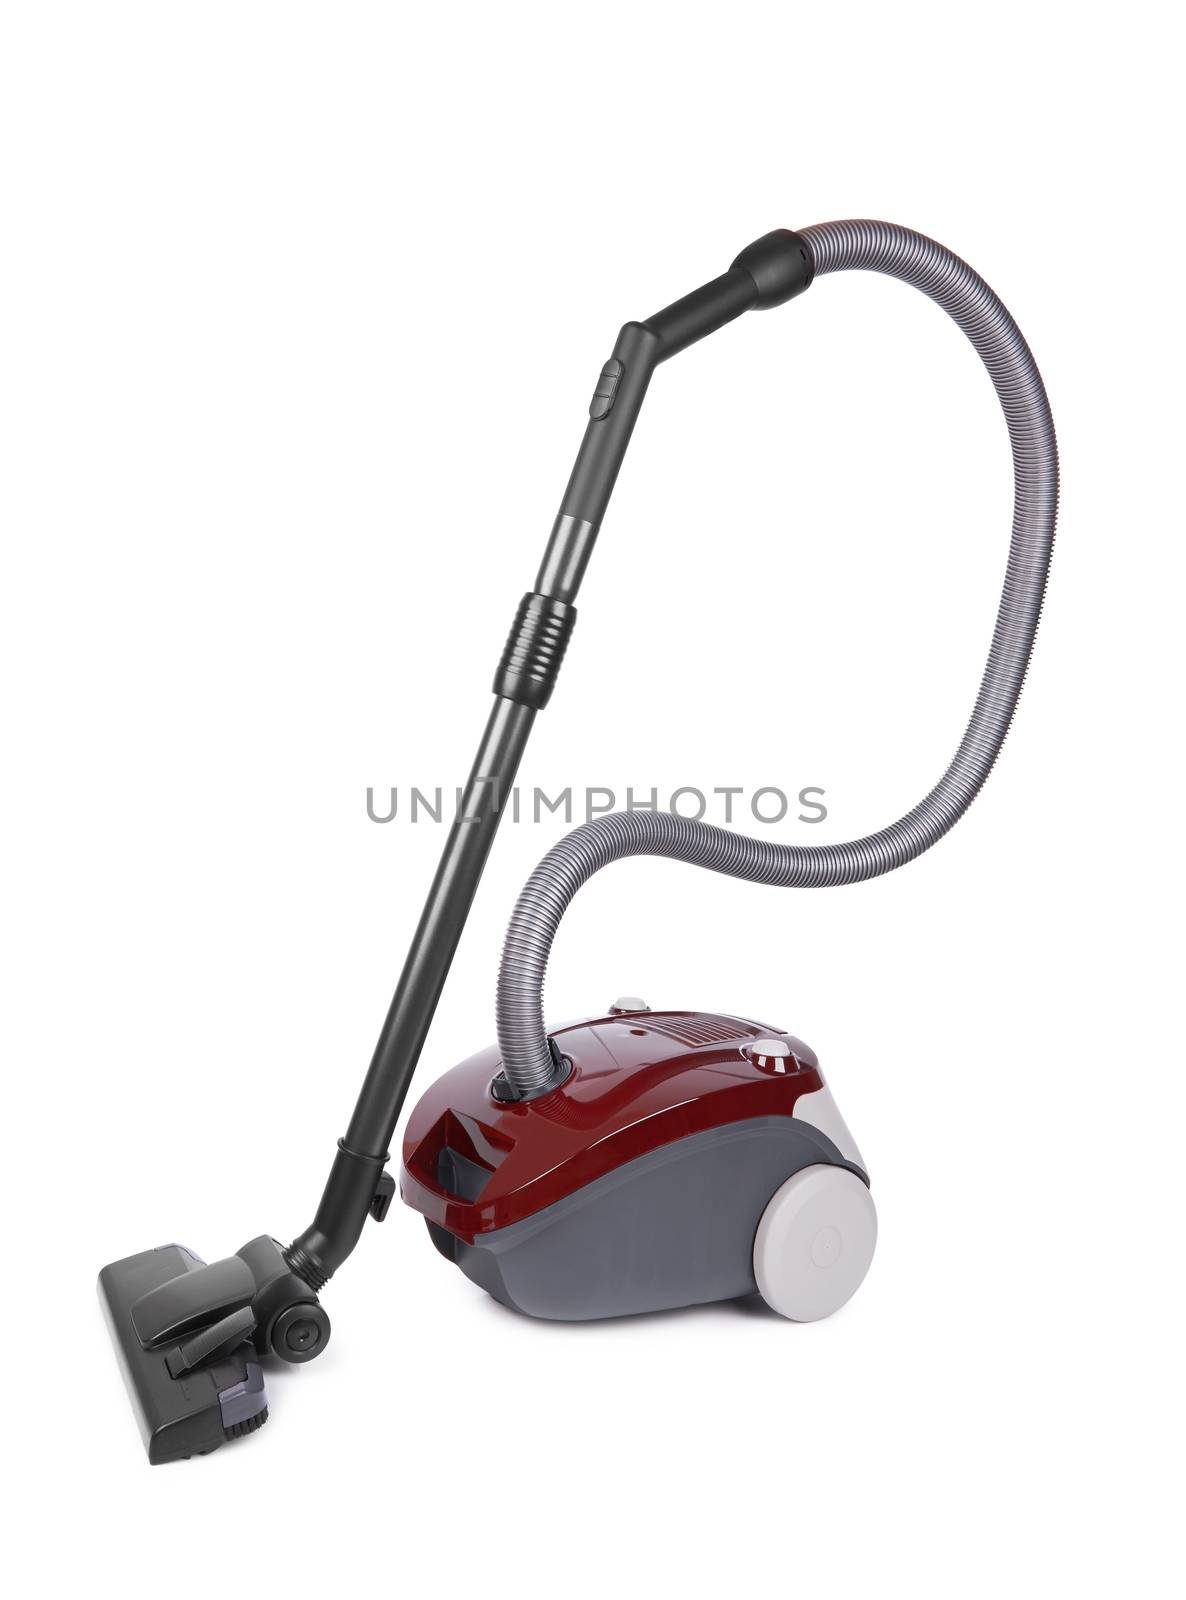 Vacuum cleaner isolated by pioneer111